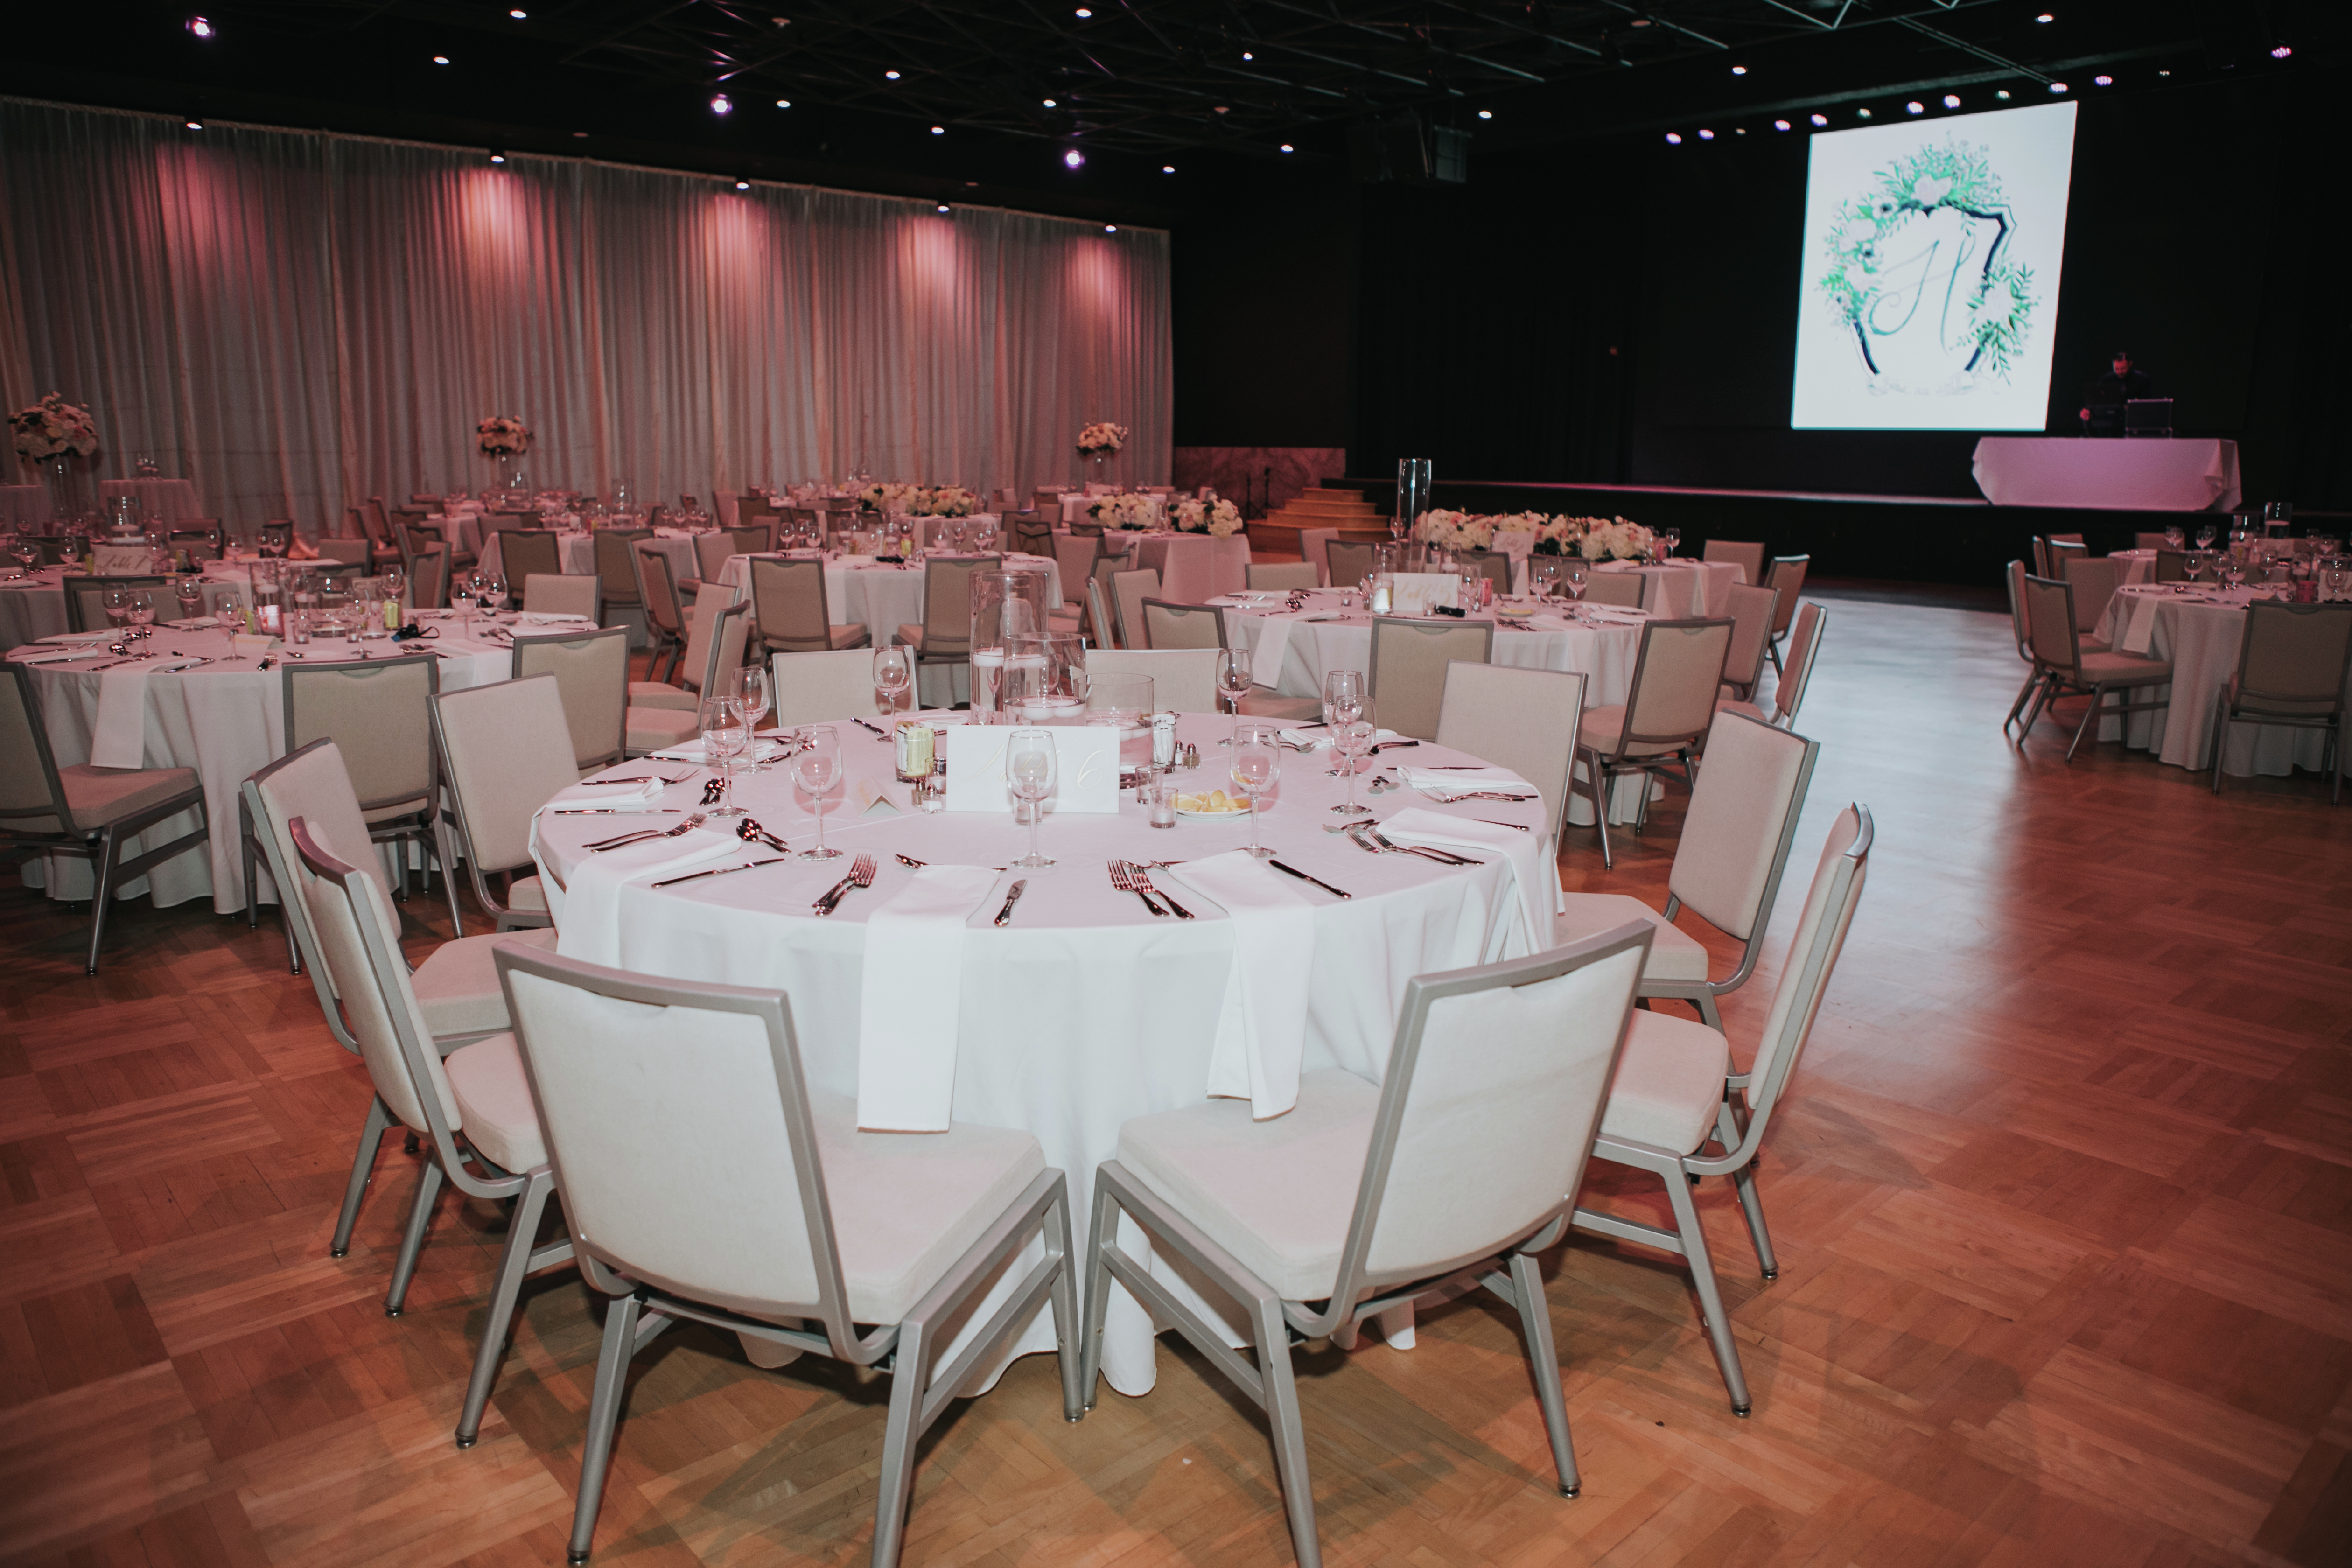 Grand Ballroom setup with round tables for wedding reception